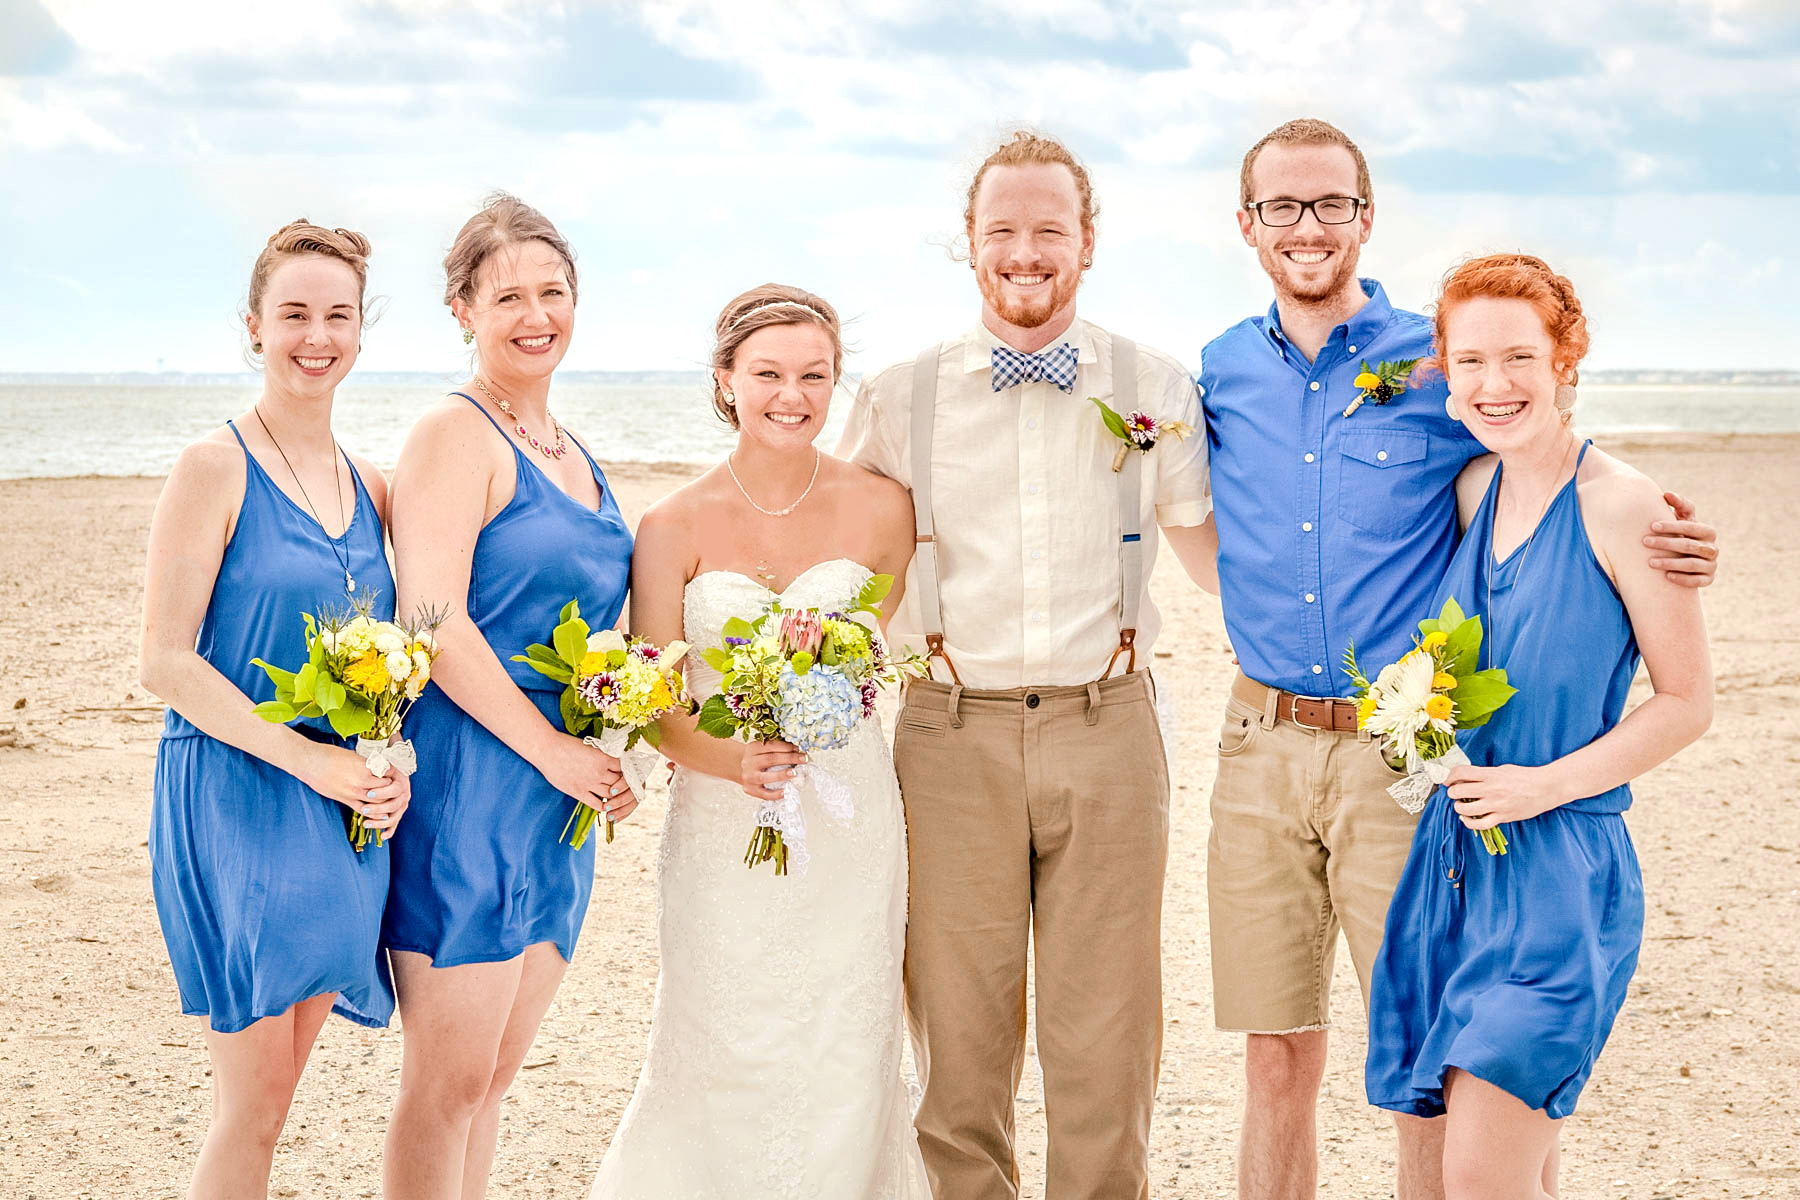 wedding part in royal blue with yellow flowers and the bride and groom at the beach